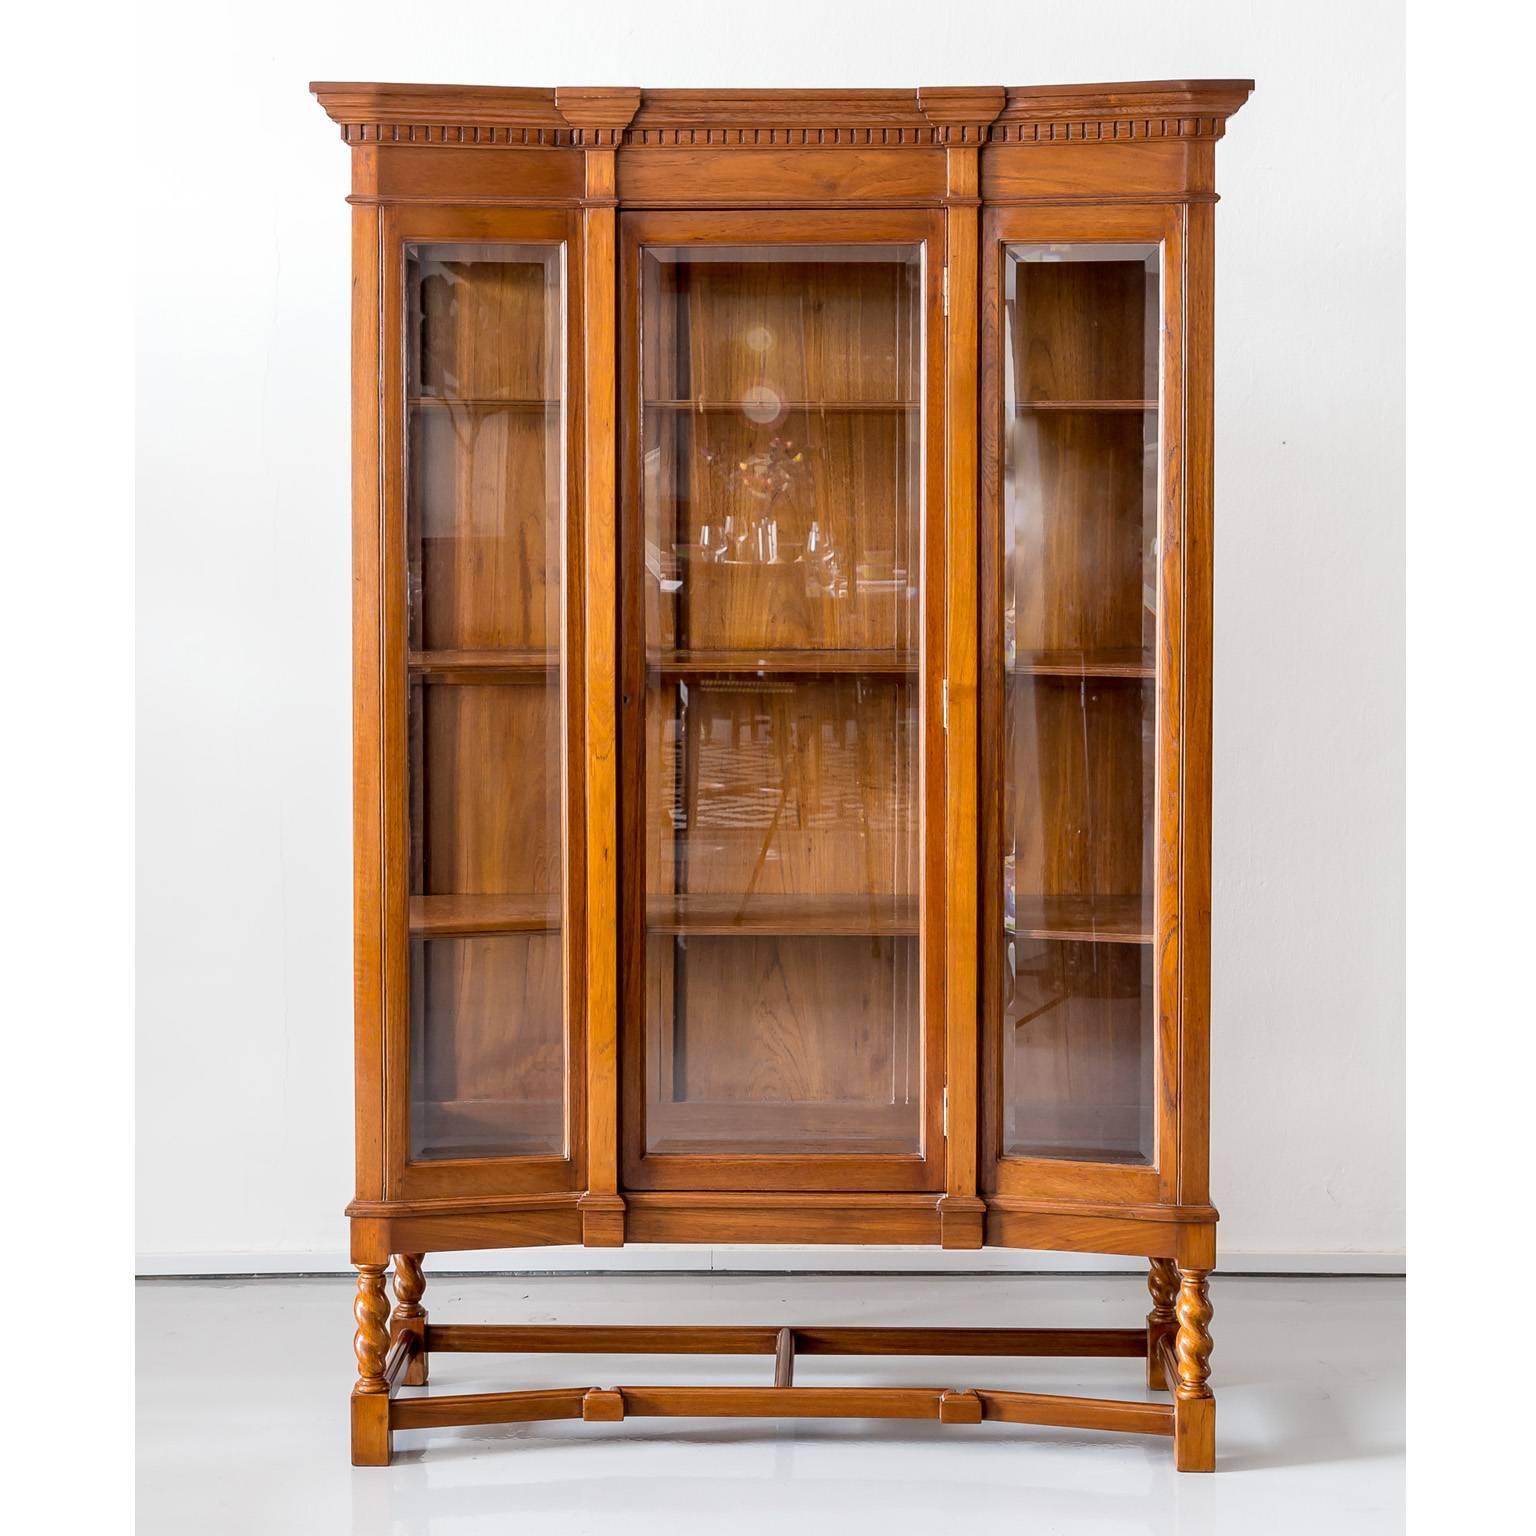 An elegant and serpentine shaped British colonial display cabinet in teak wood with
a deep moulded and carved cornice. The cabinet has one door with a large glazed
panel that is flanked by two pilasters and two smaller glazed panels. The two